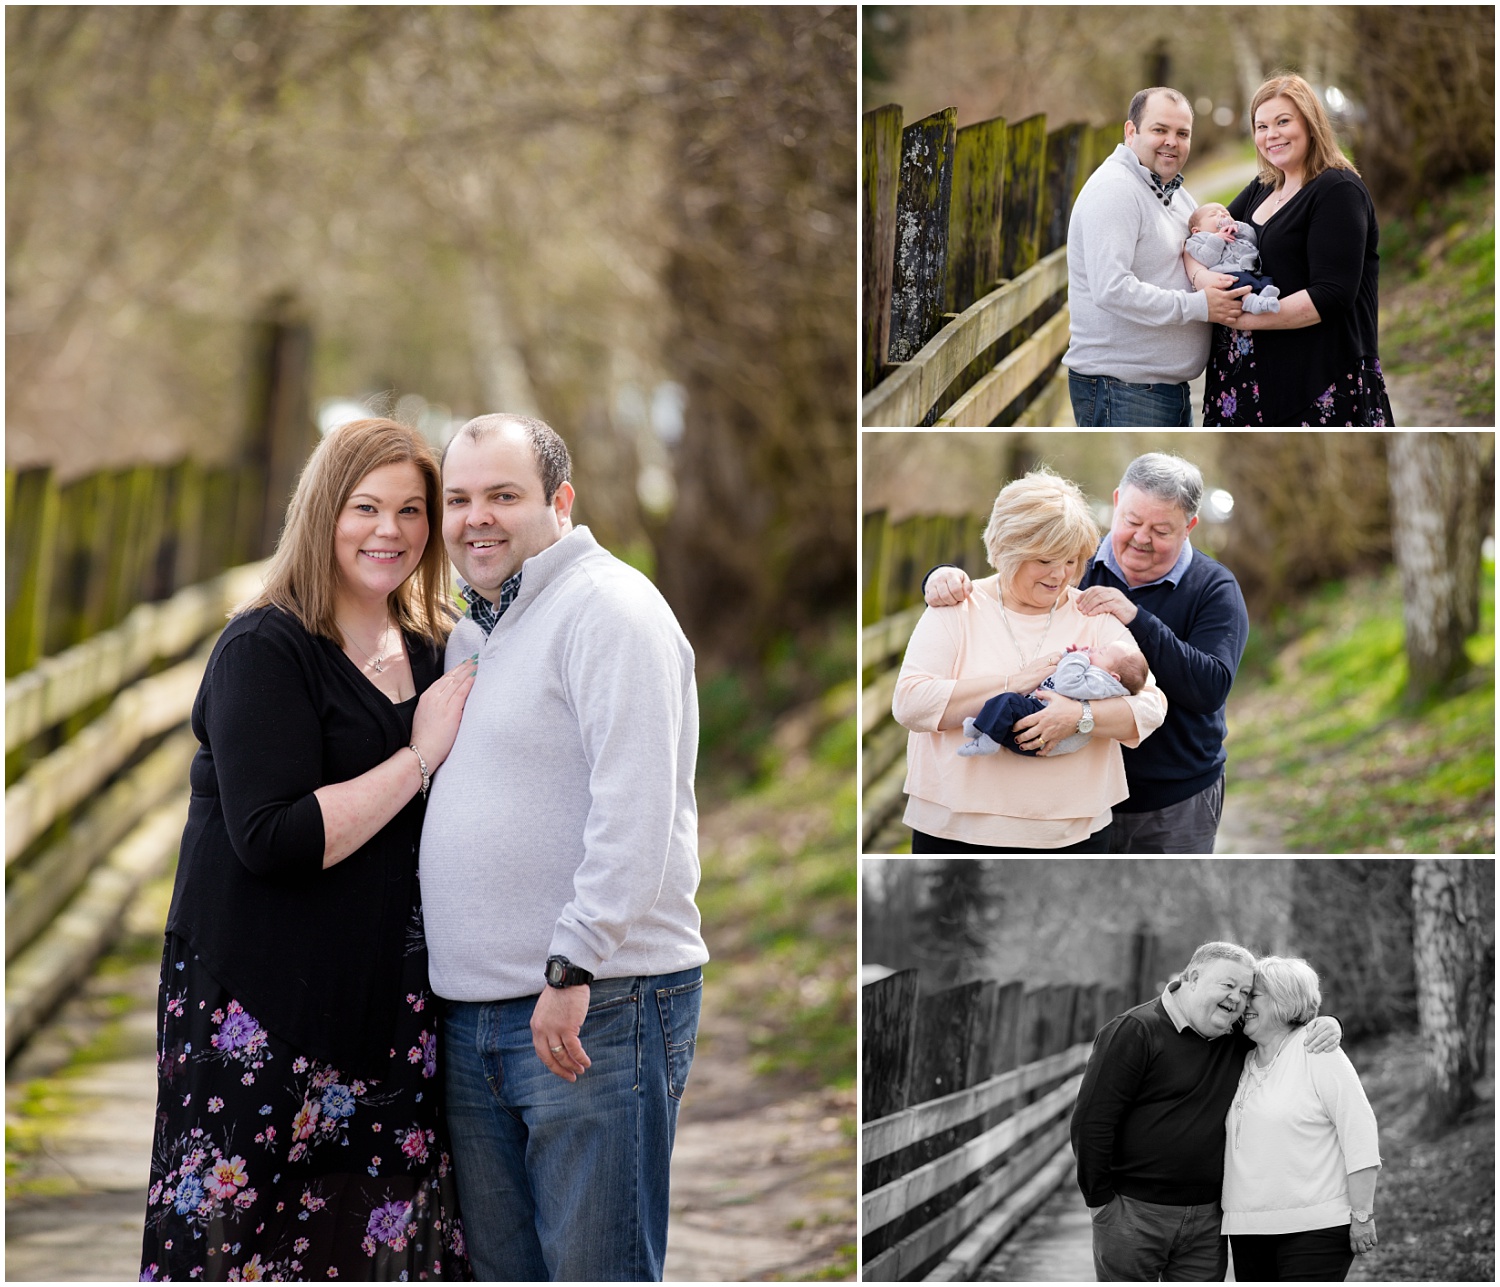 Amazing Day Photography - Fort Langley Family Session - Langley Family Photographer (7).jpg